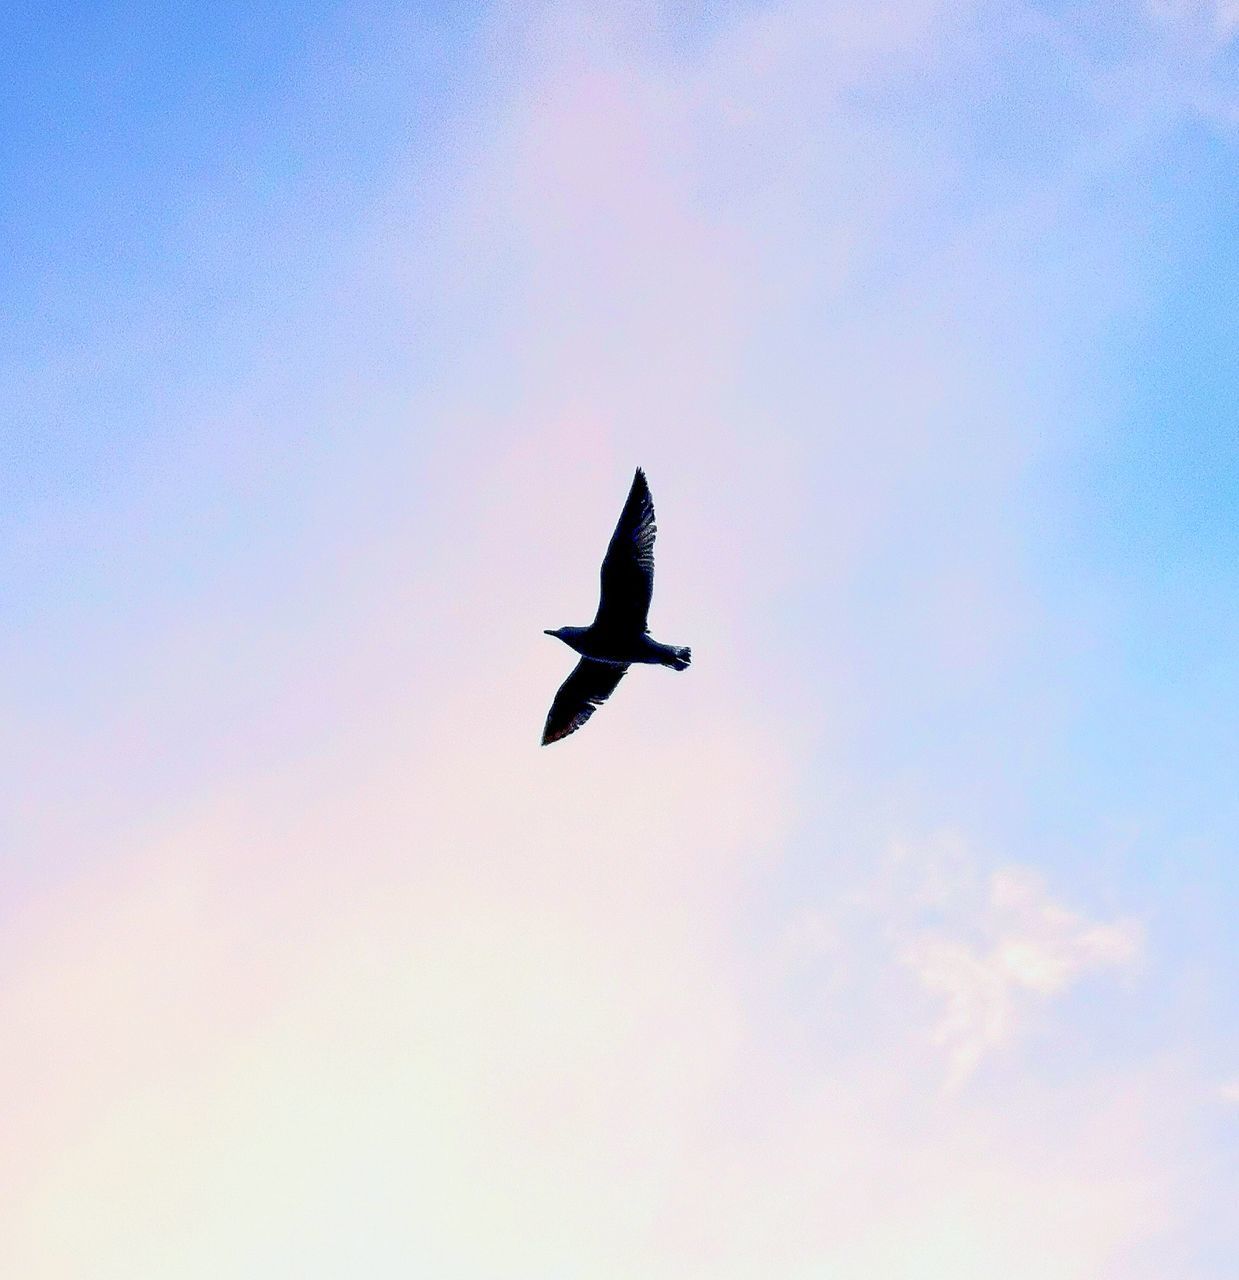 LOW ANGLE VIEW OF SILHOUETTE BIRD FLYING